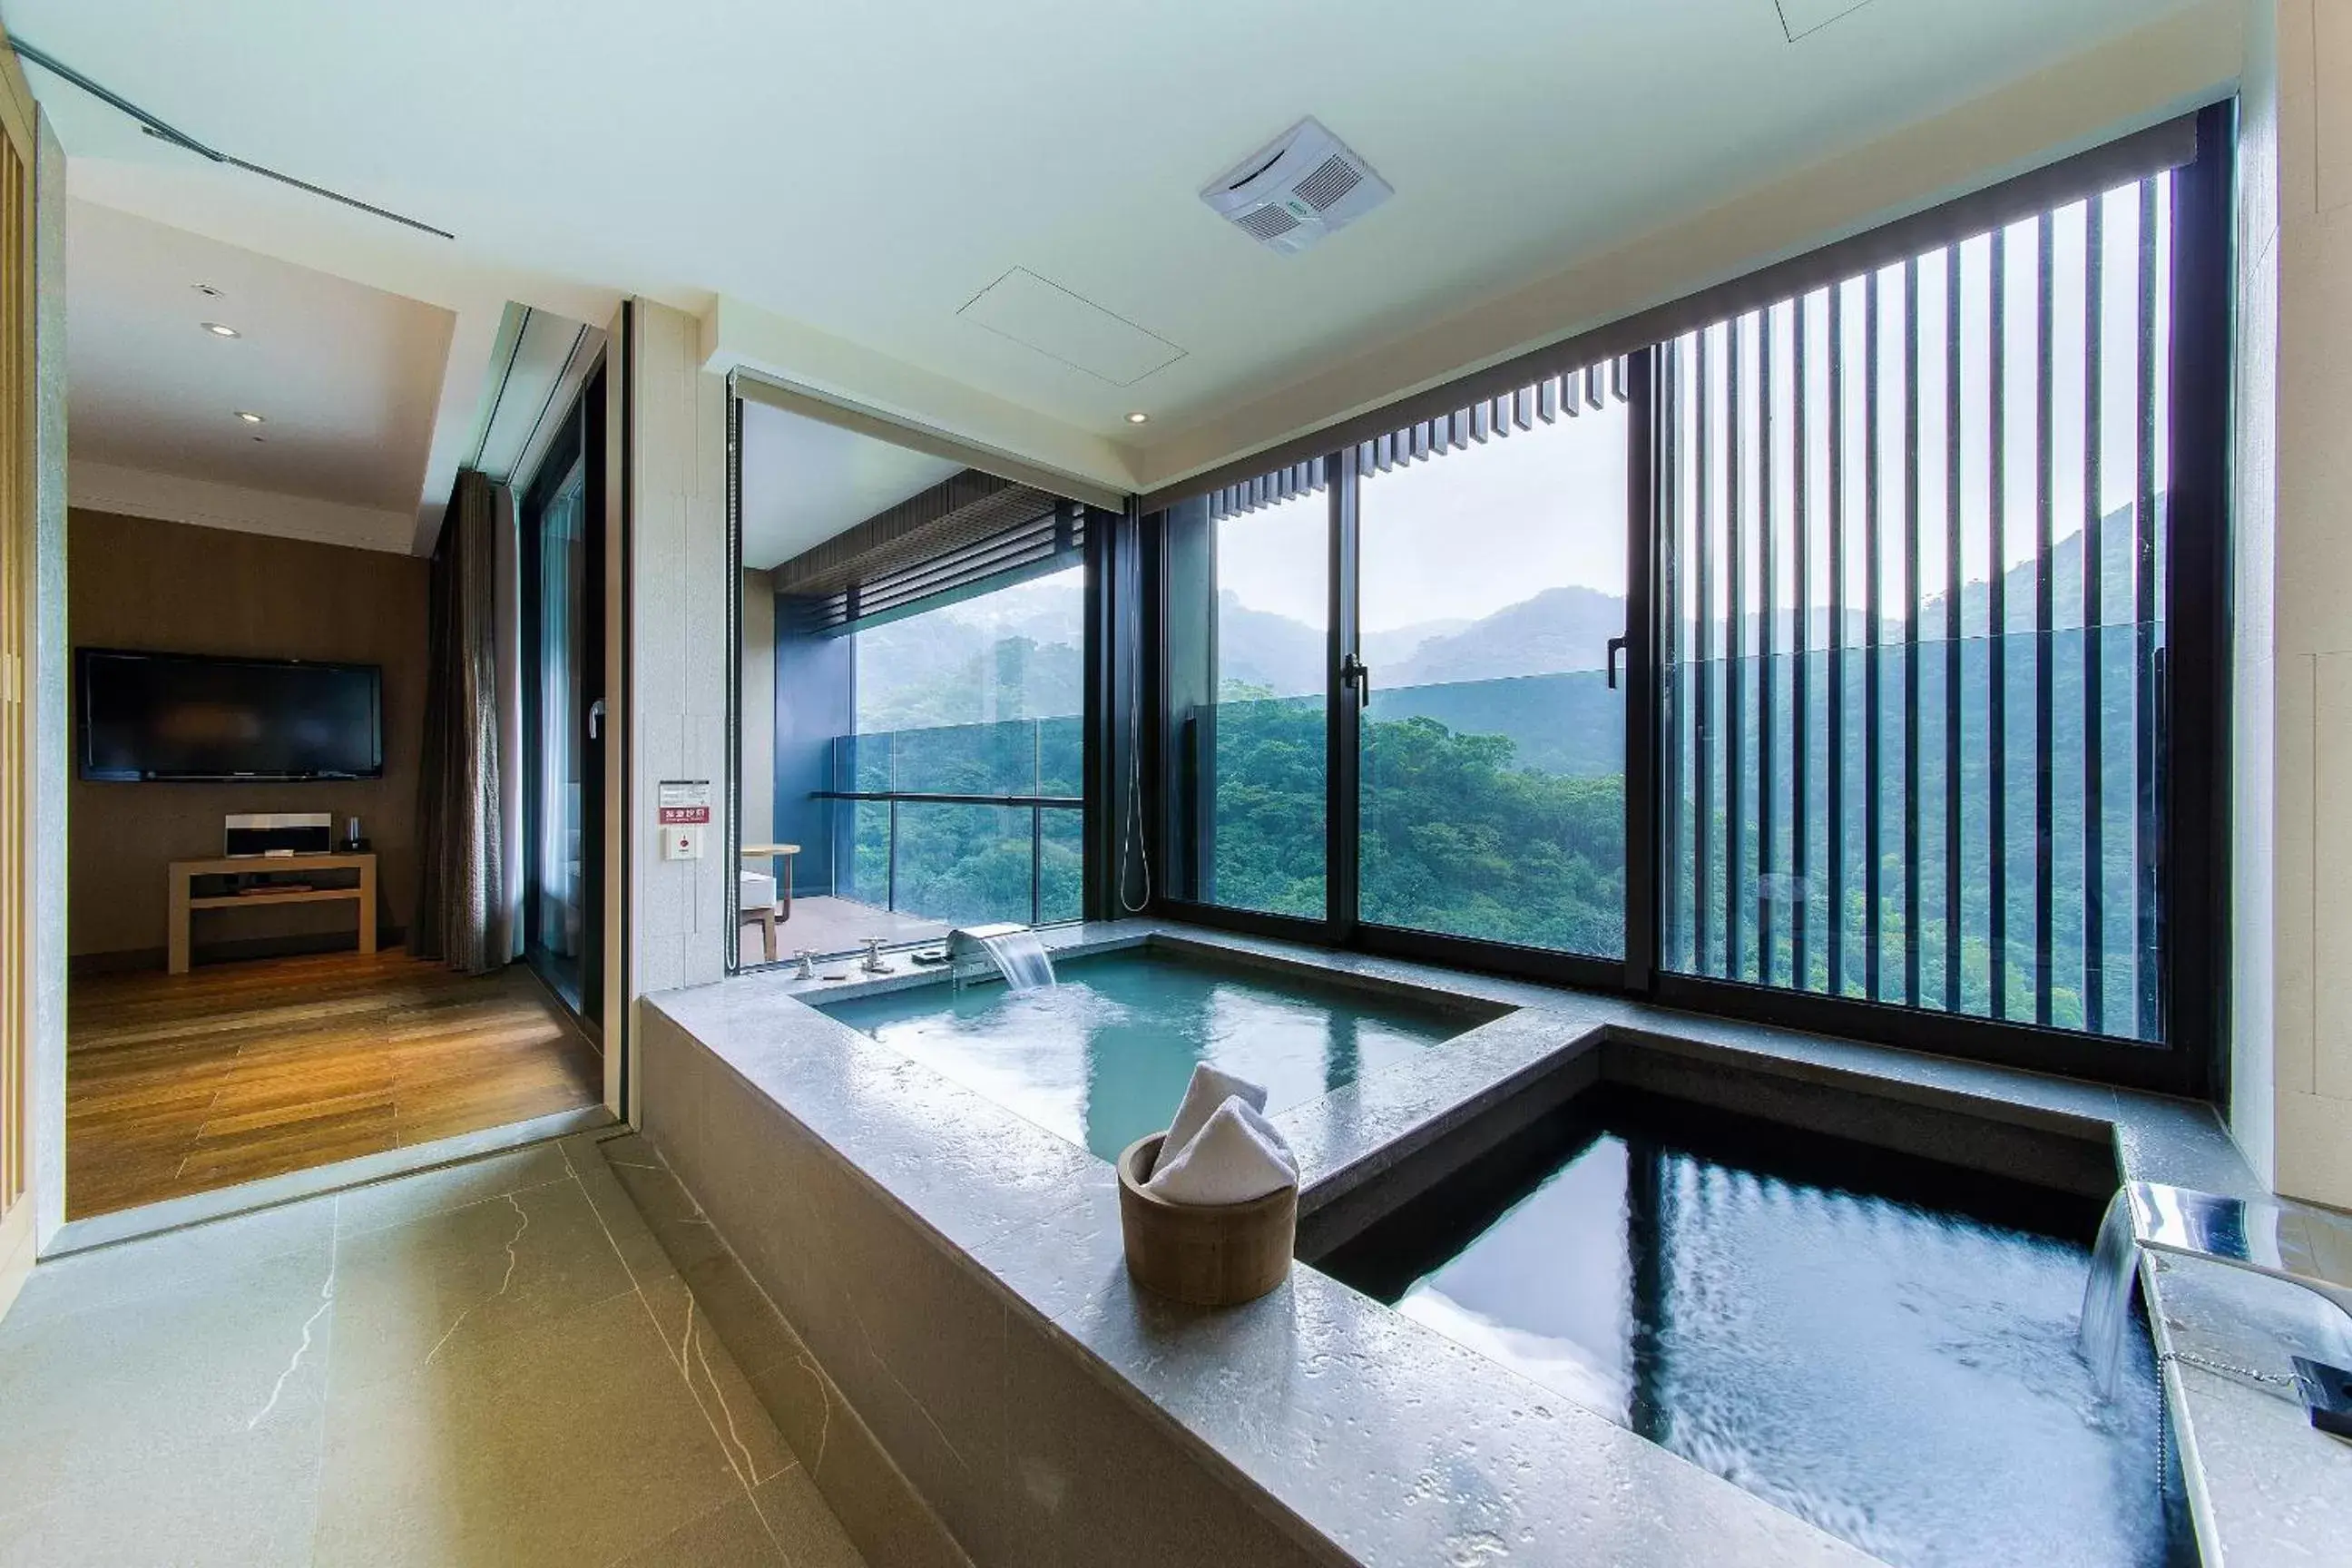 Bathroom, Swimming Pool in Grand View Resort Beitou